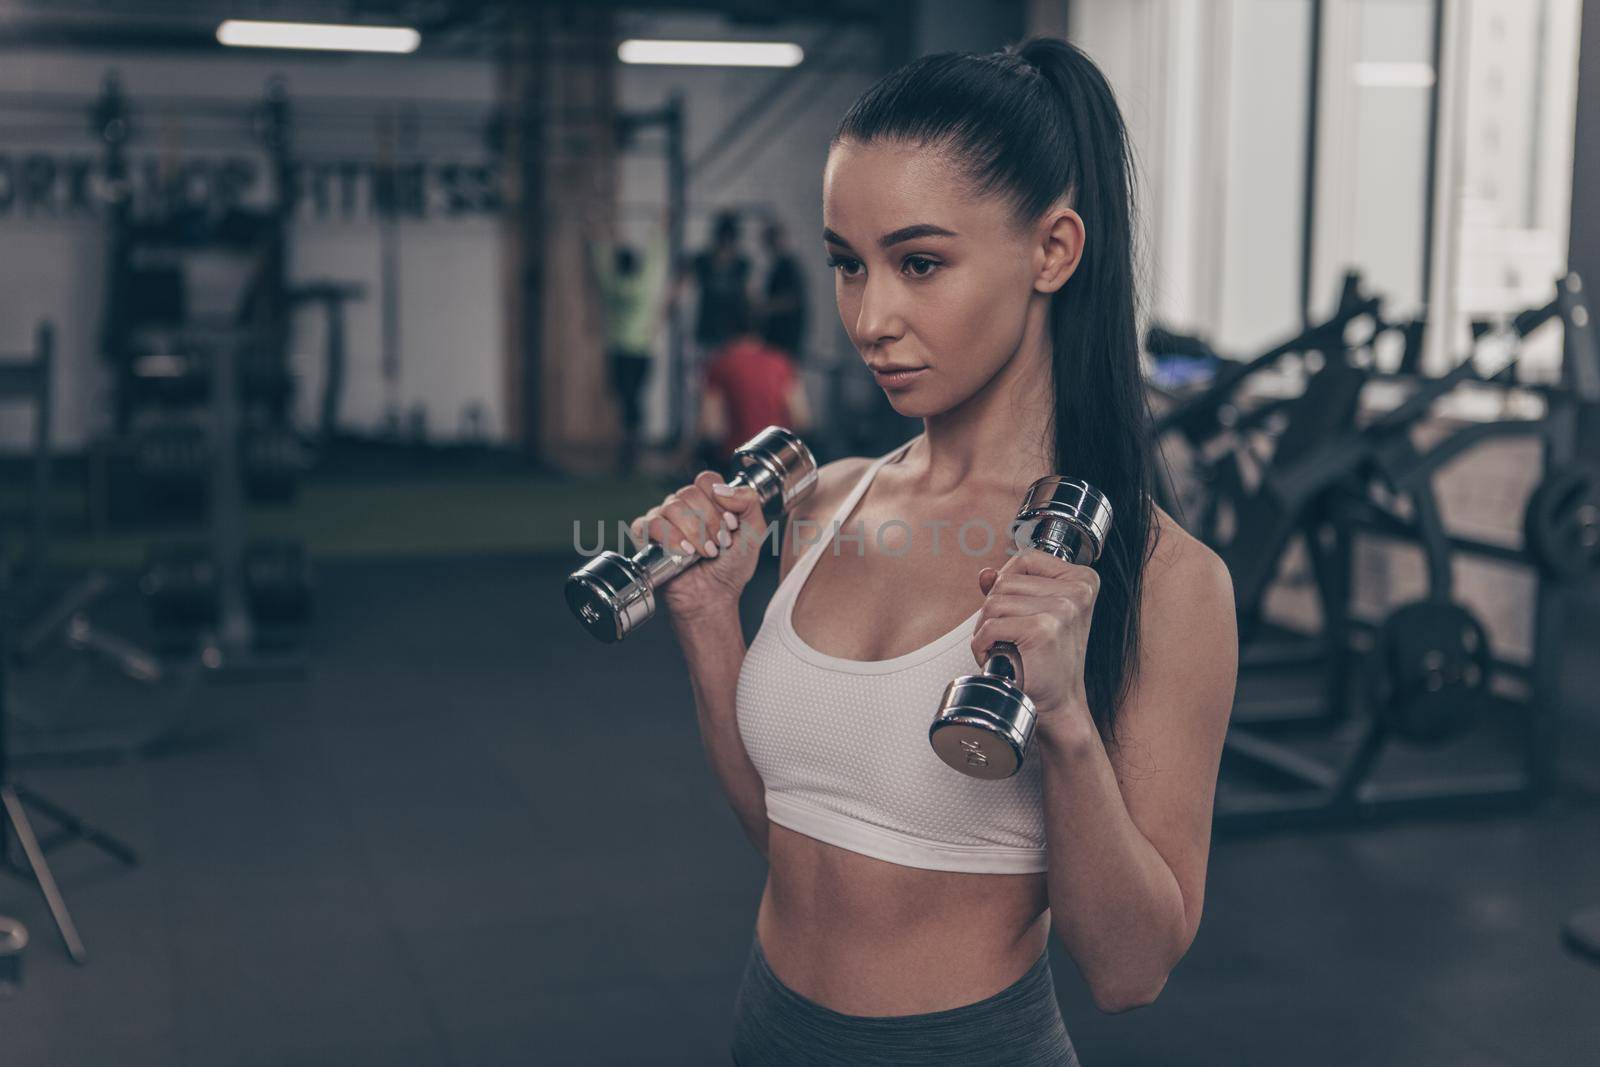 Beautiful fitness woman looking concentrated, exercising with dumbbells, copy space on the side. Charming sportswoman lifting weights at the gym. Attractive female athlete working out. Gym concept